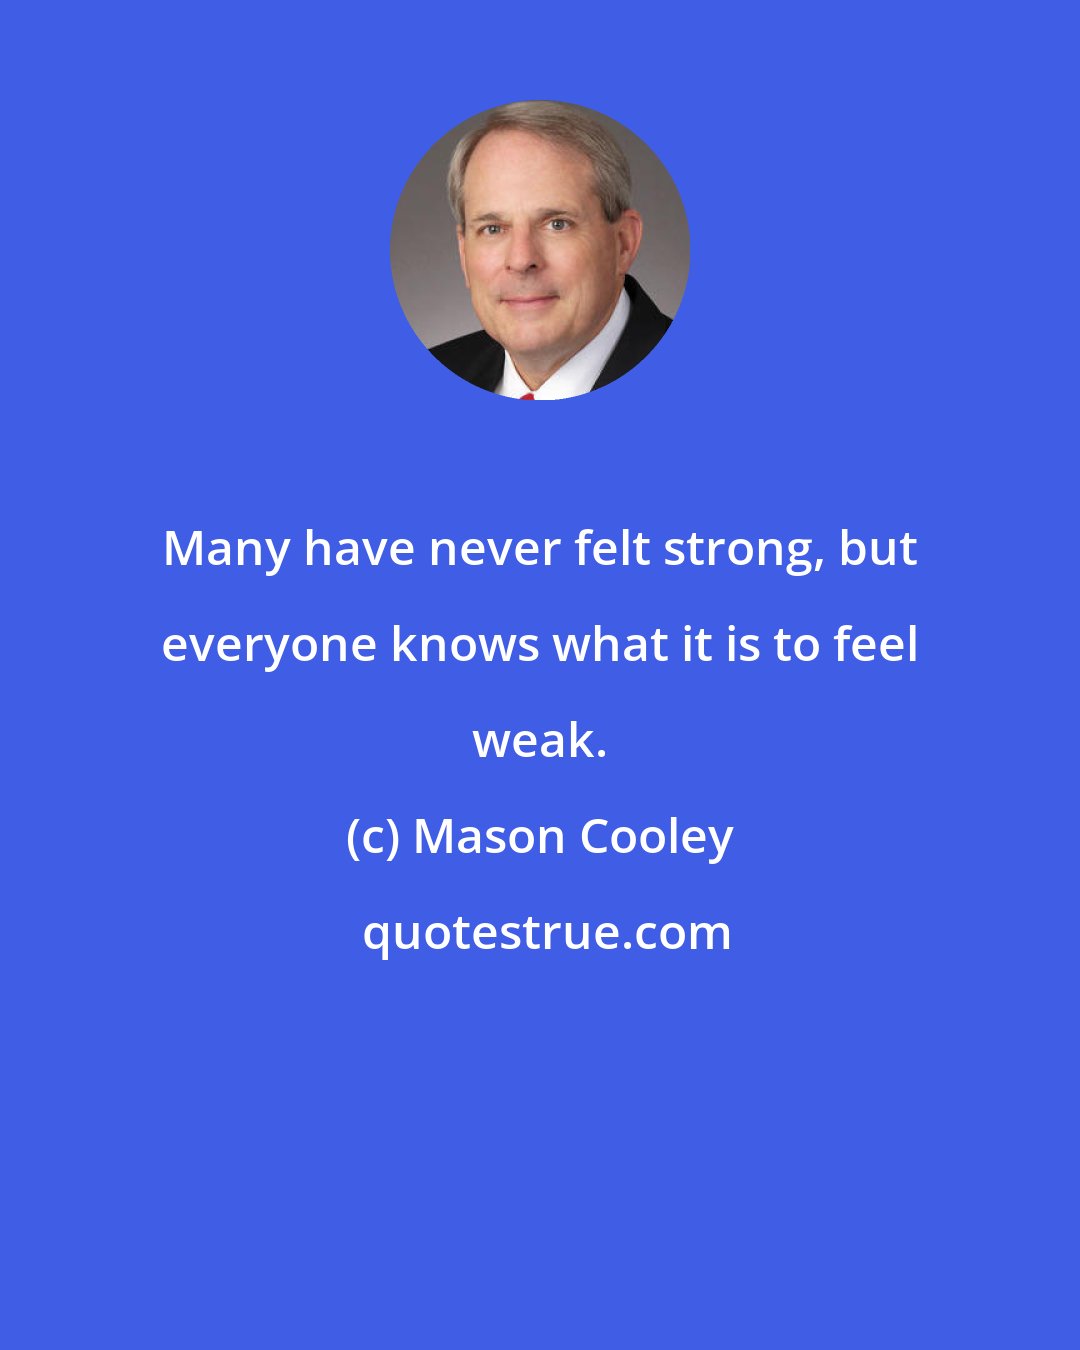 Mason Cooley: Many have never felt strong, but everyone knows what it is to feel weak.